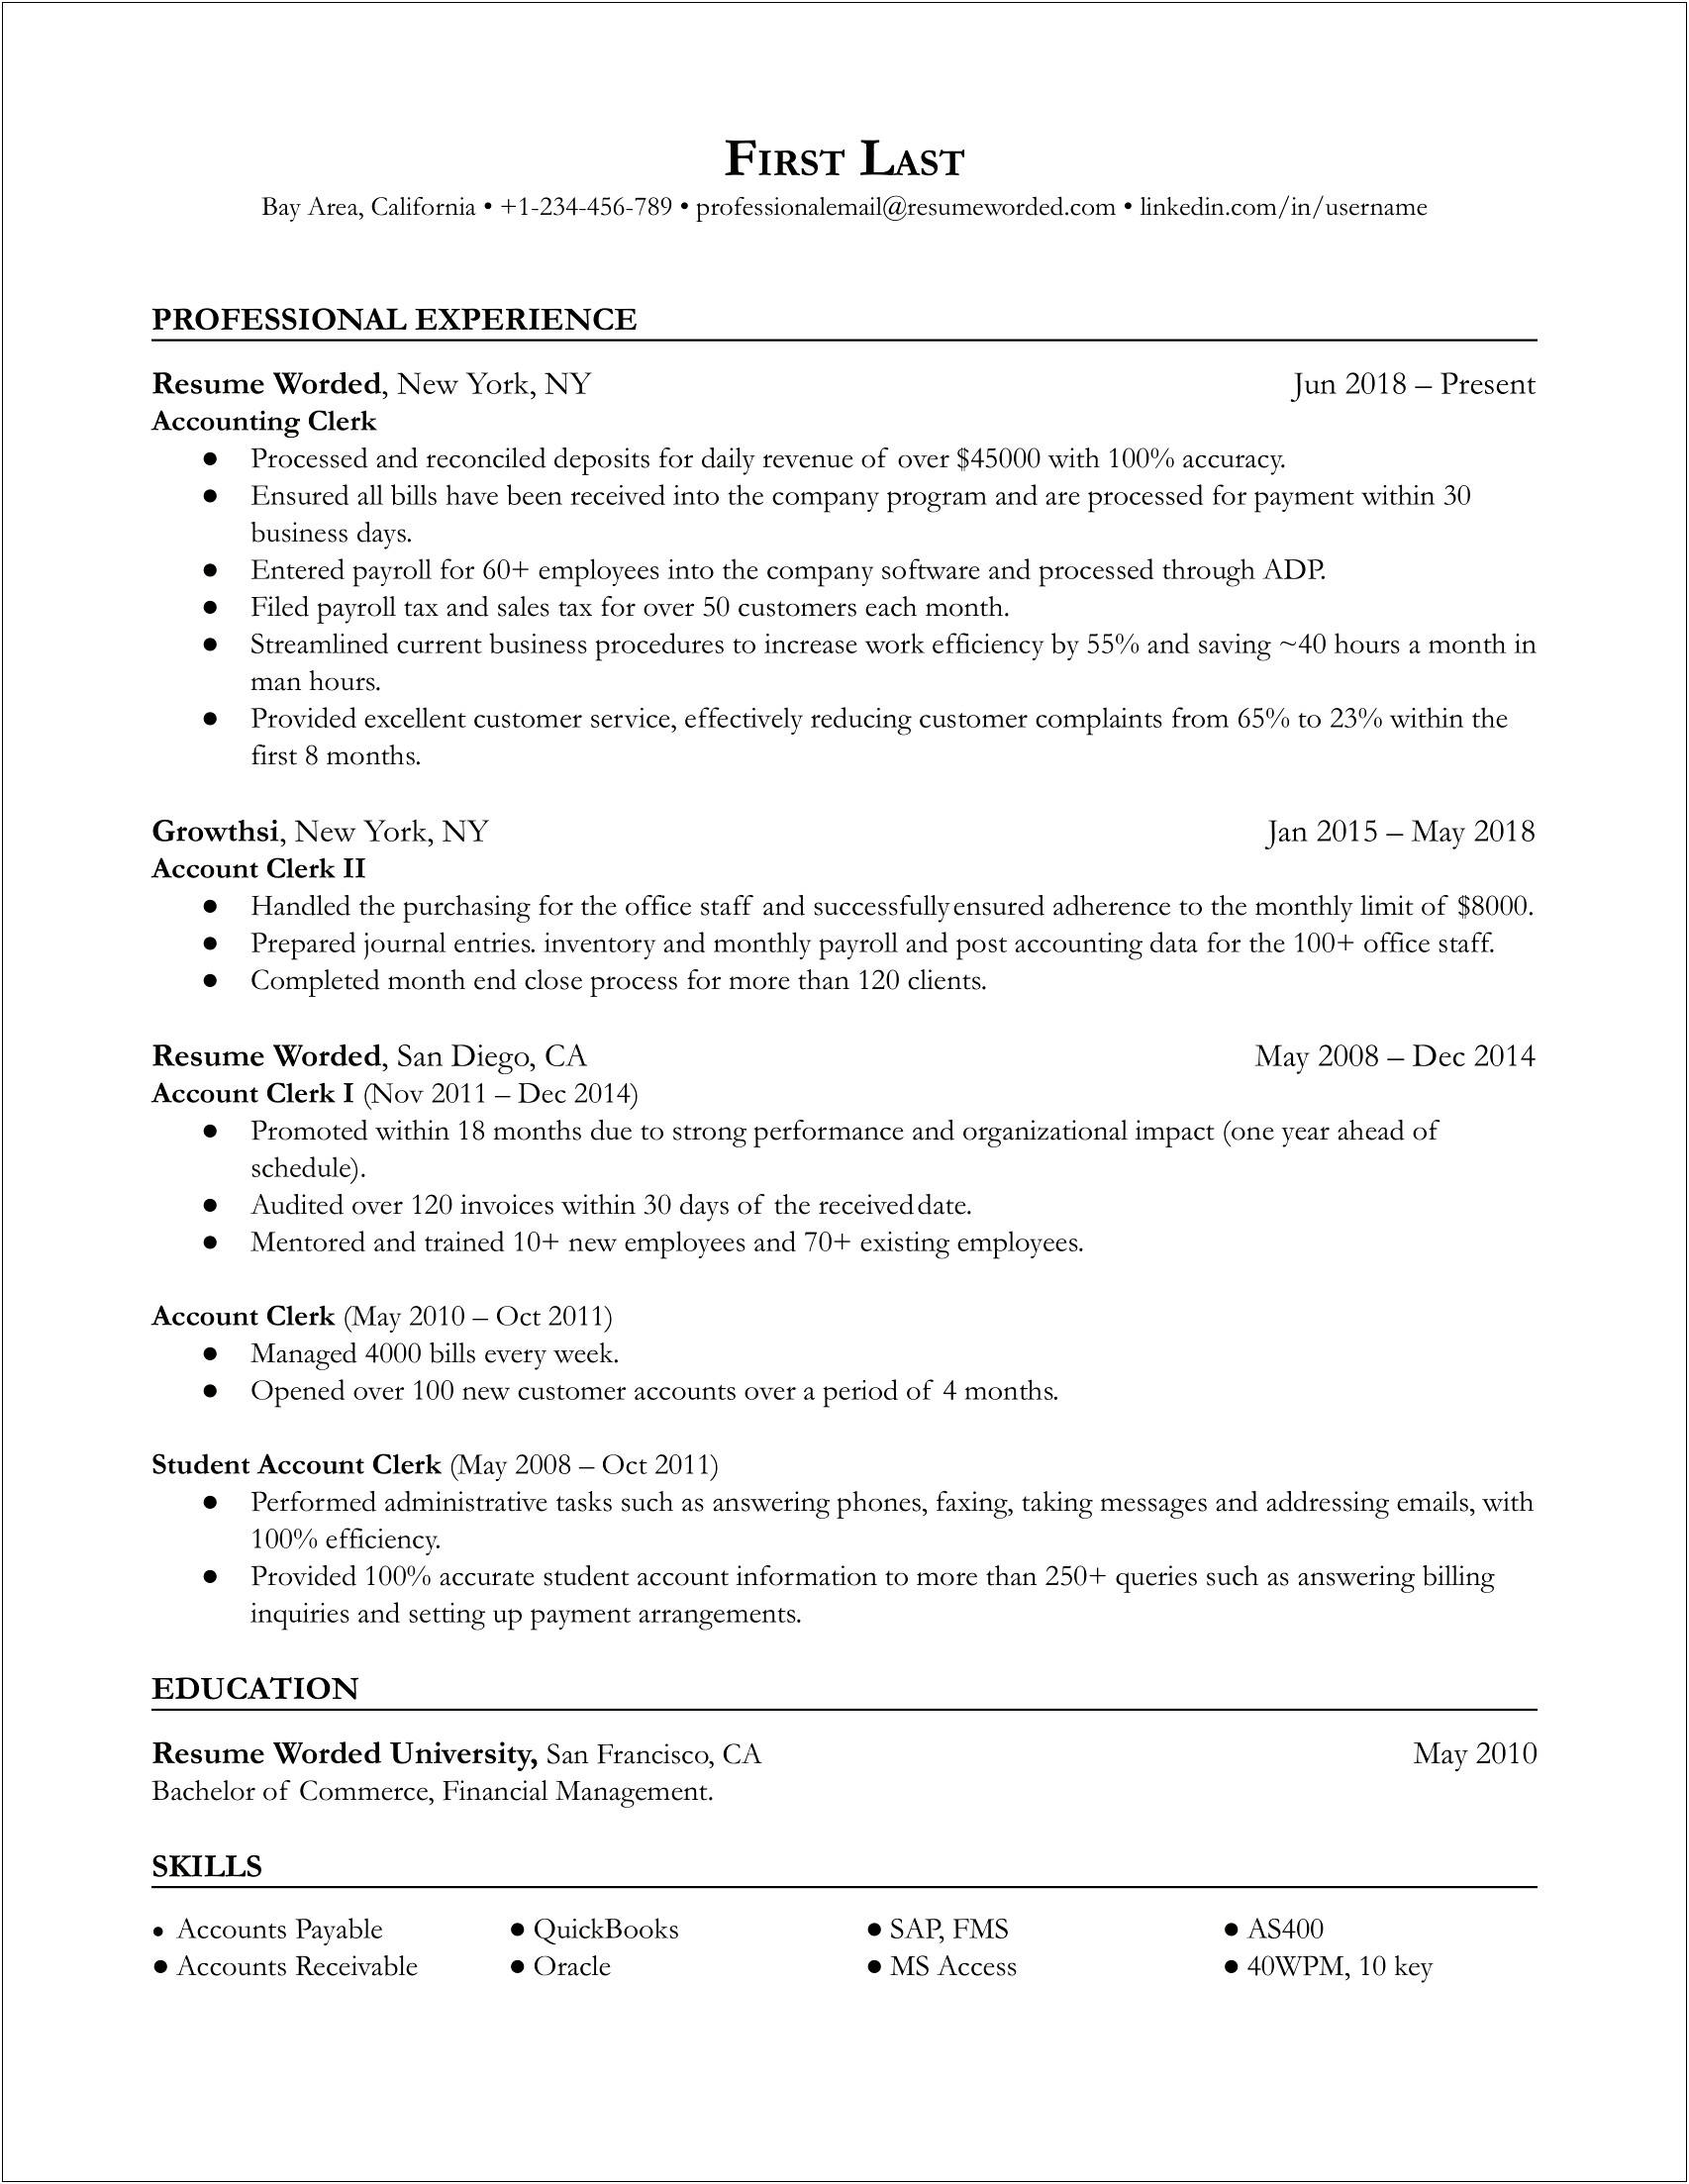 Resume Objective Summary Accounting Assistant